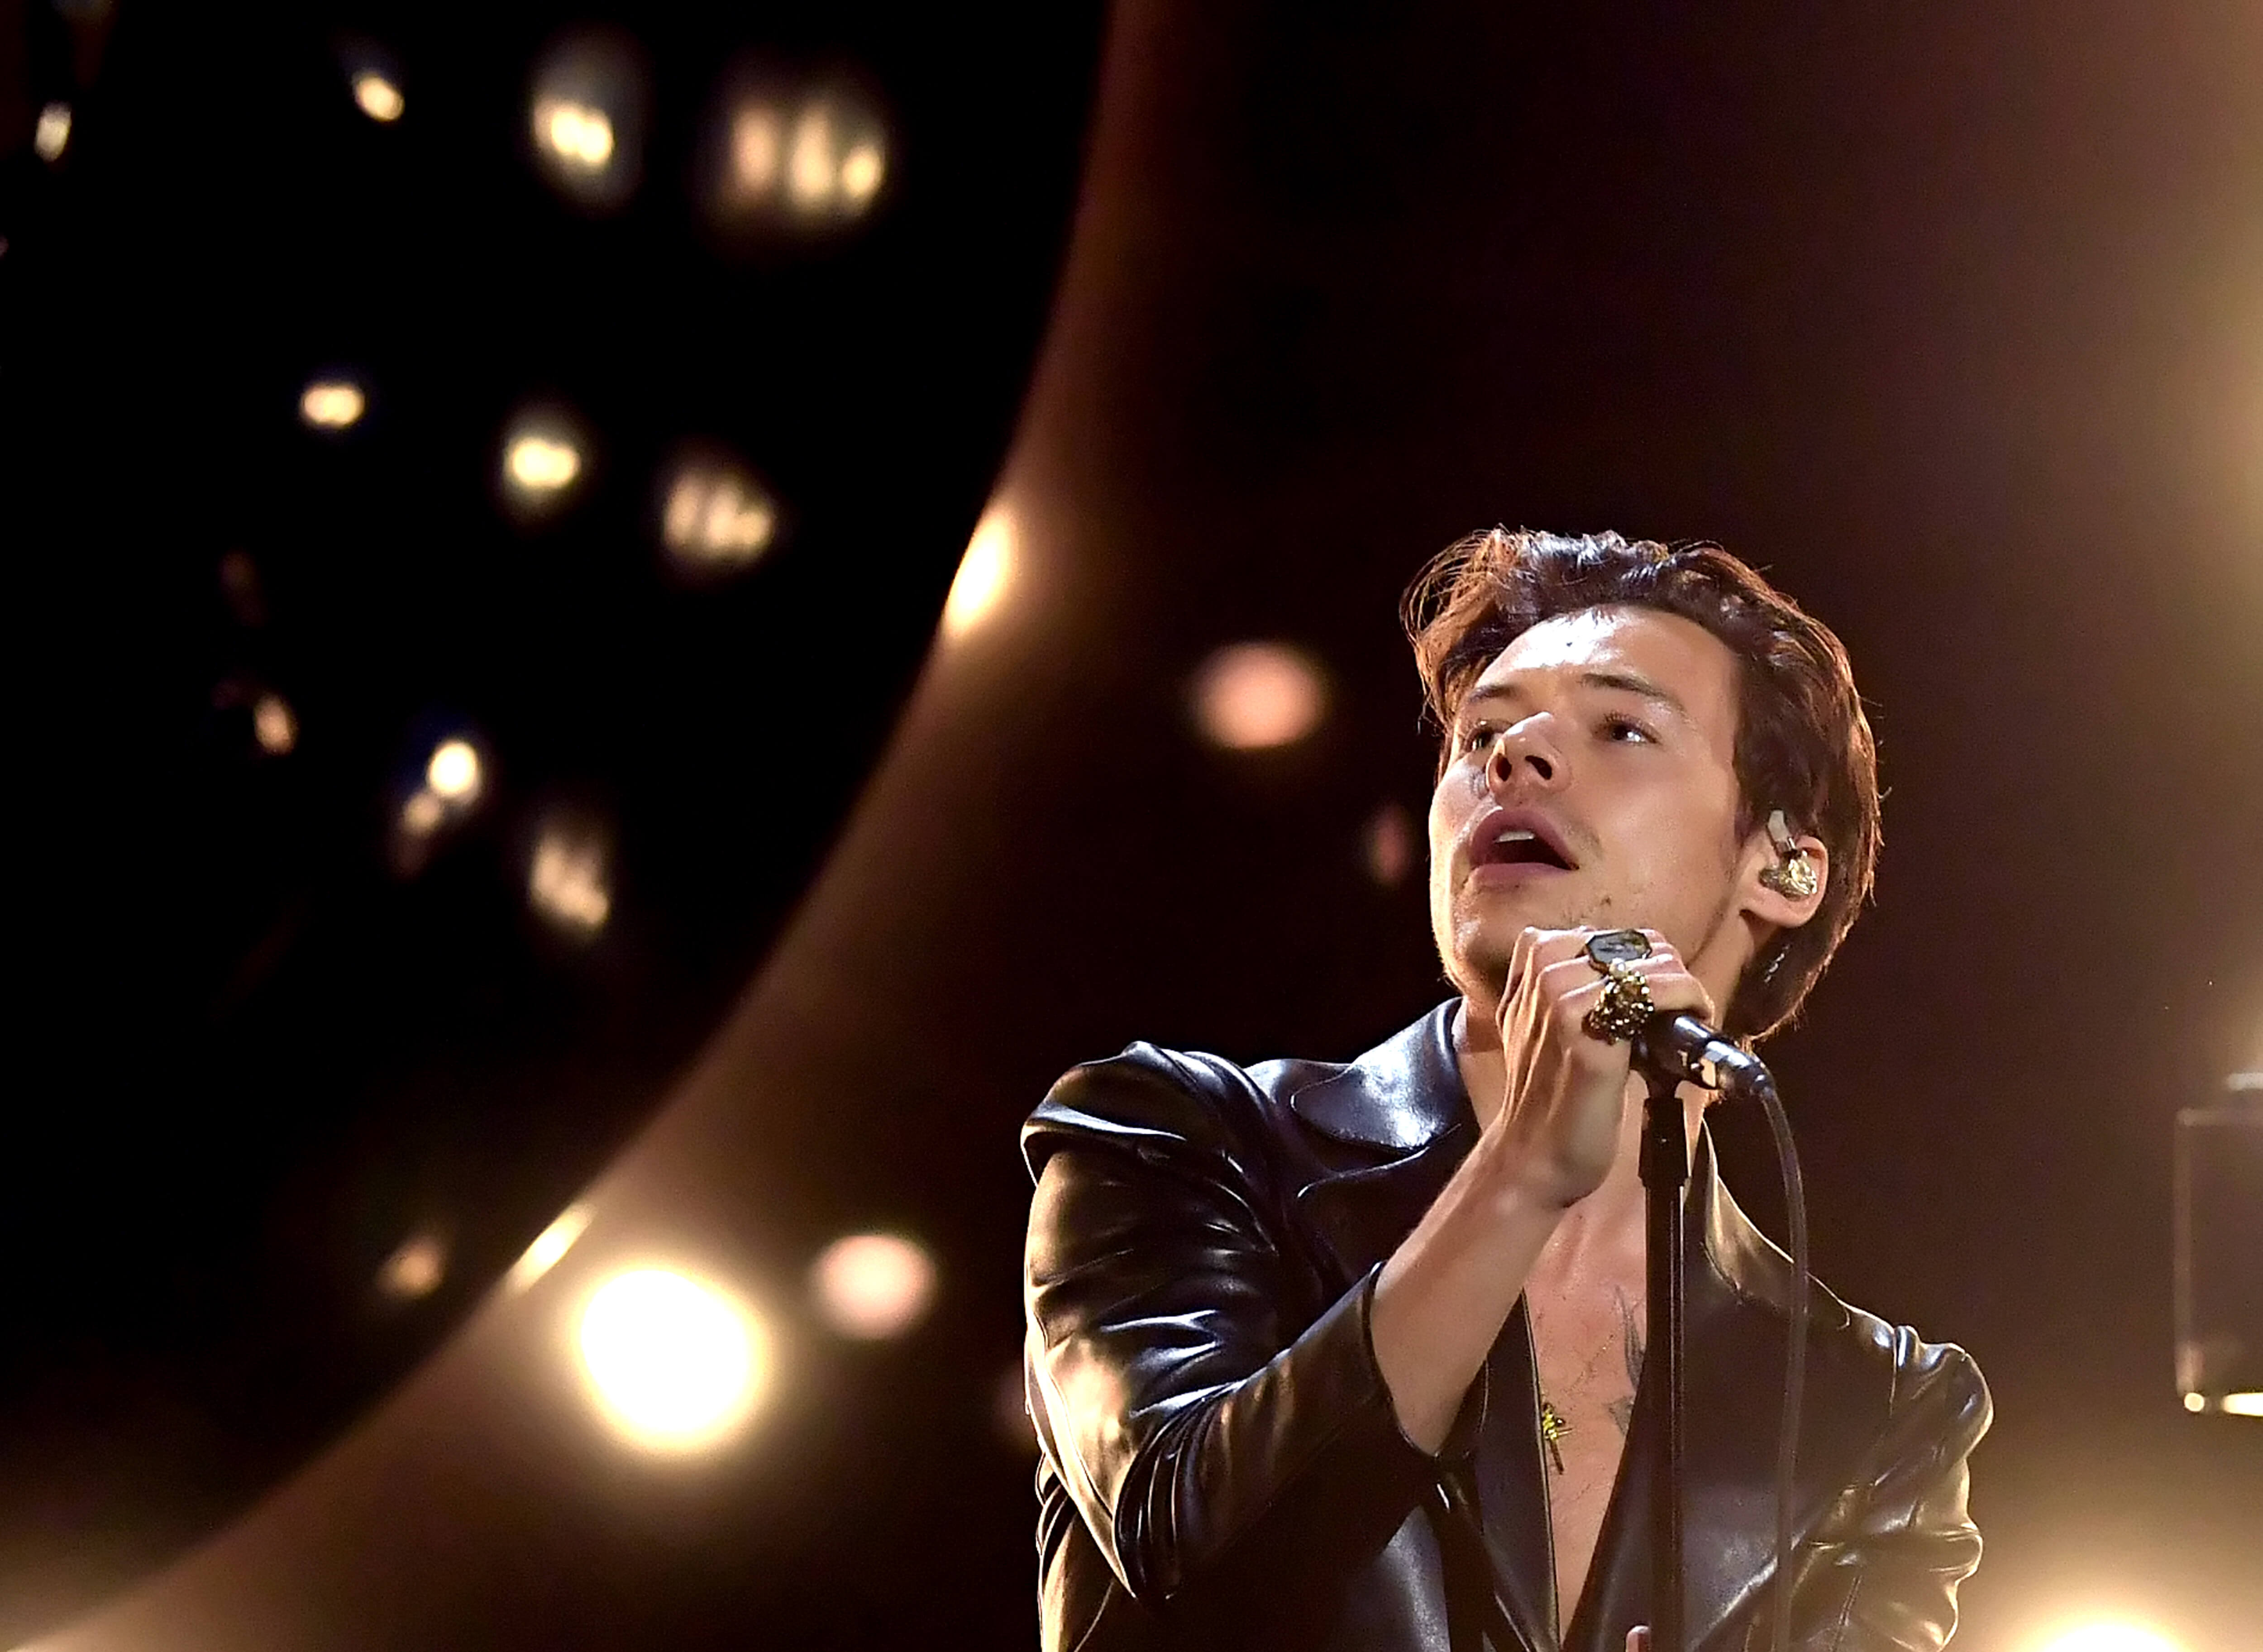 Harry Styles singing on stage.